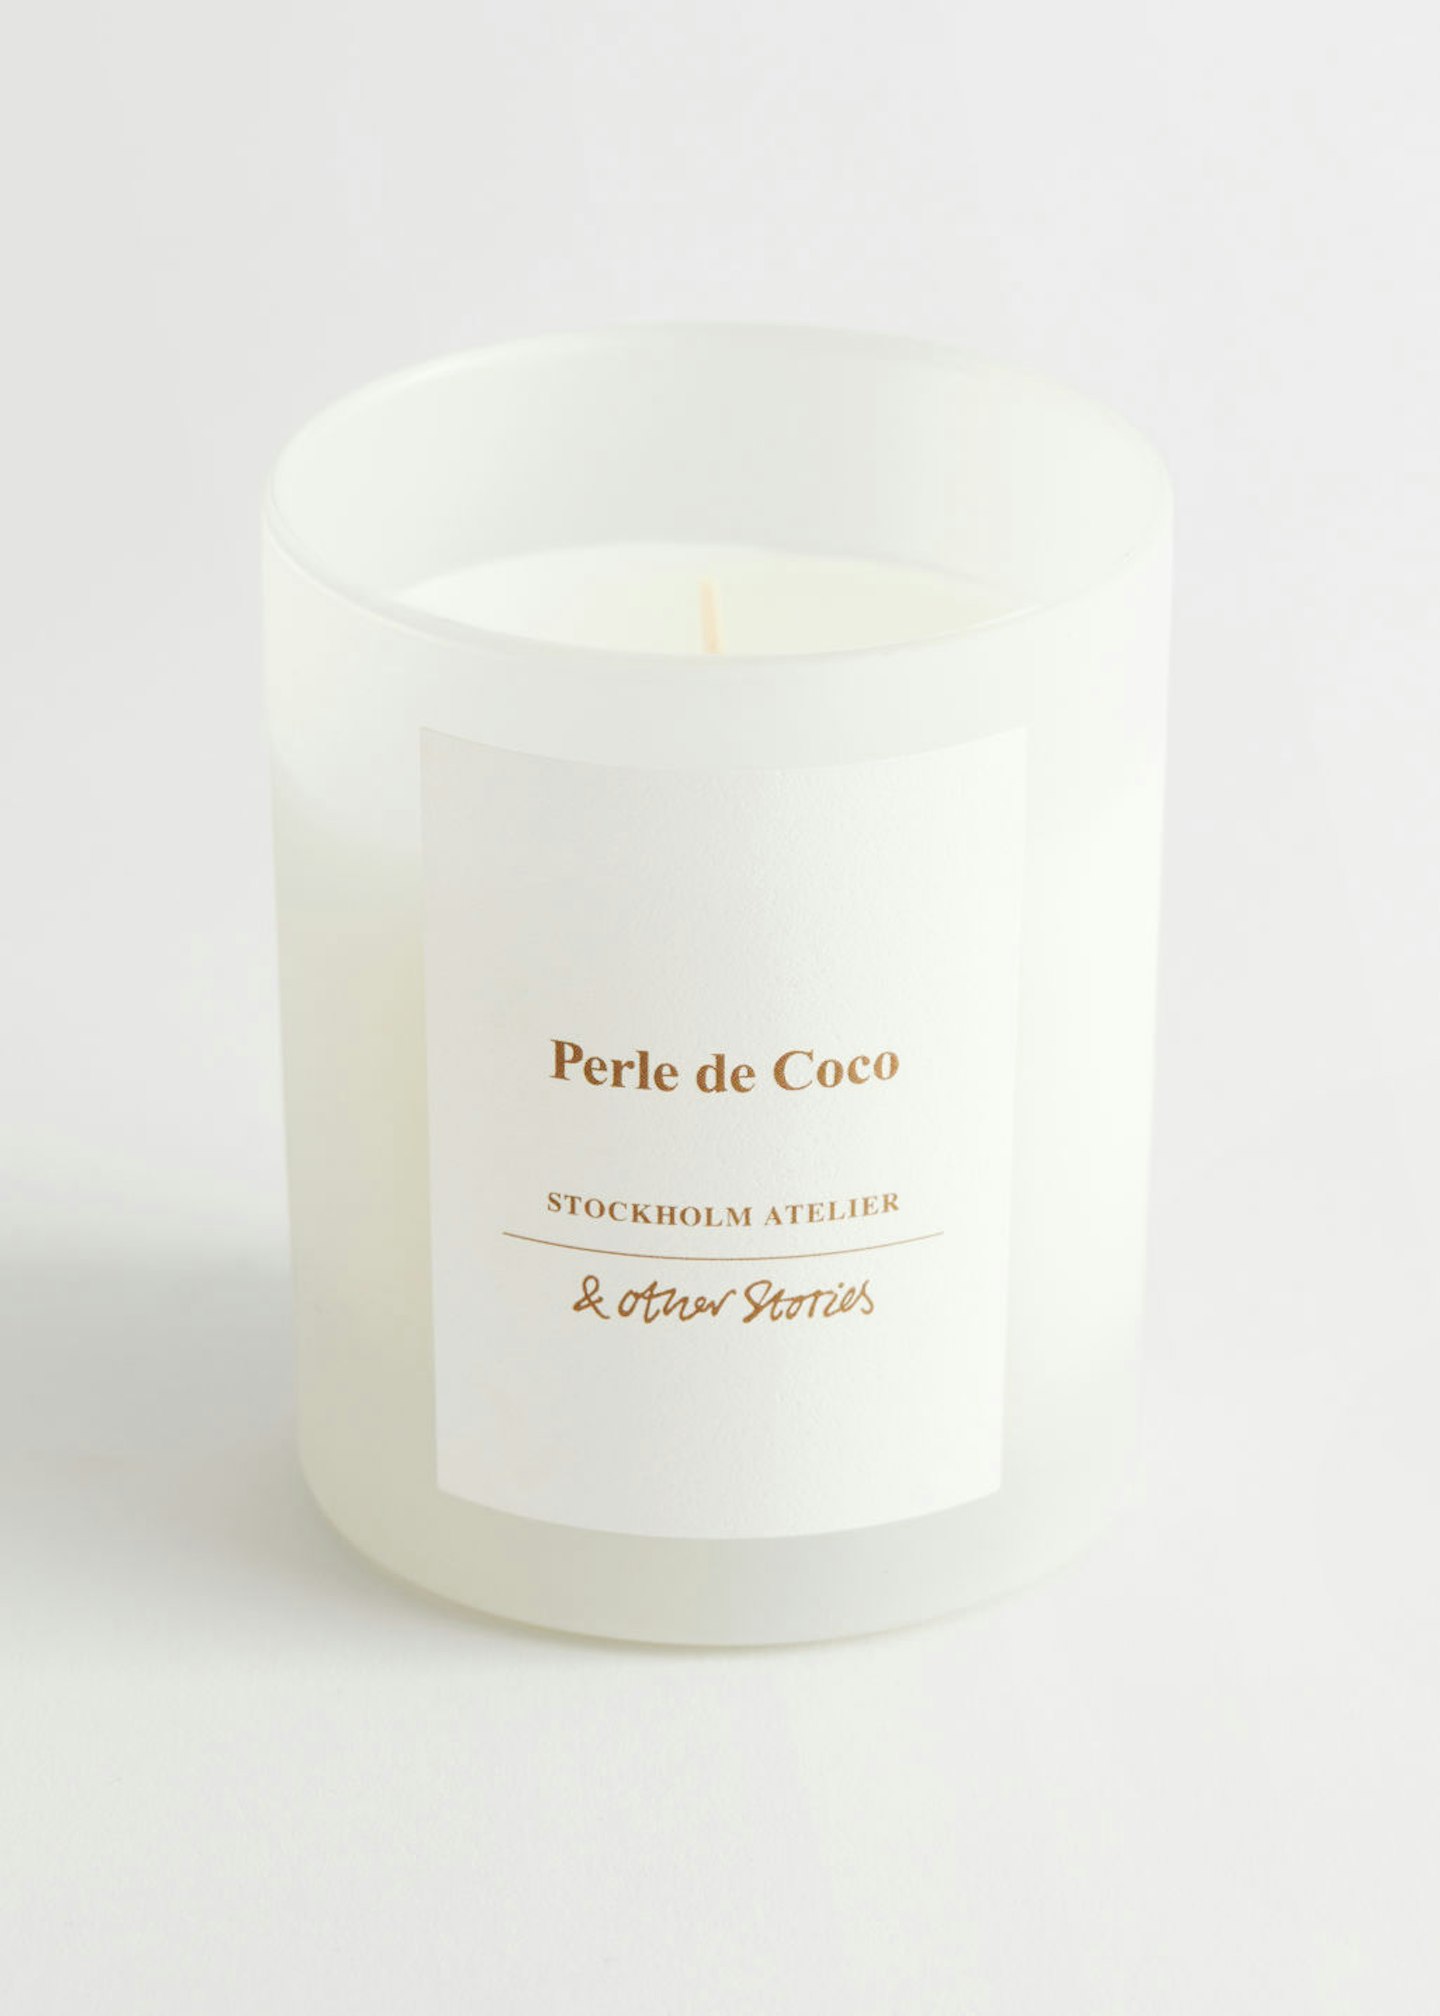 & Other Stories, Perle de Coco Scented Candle, £17